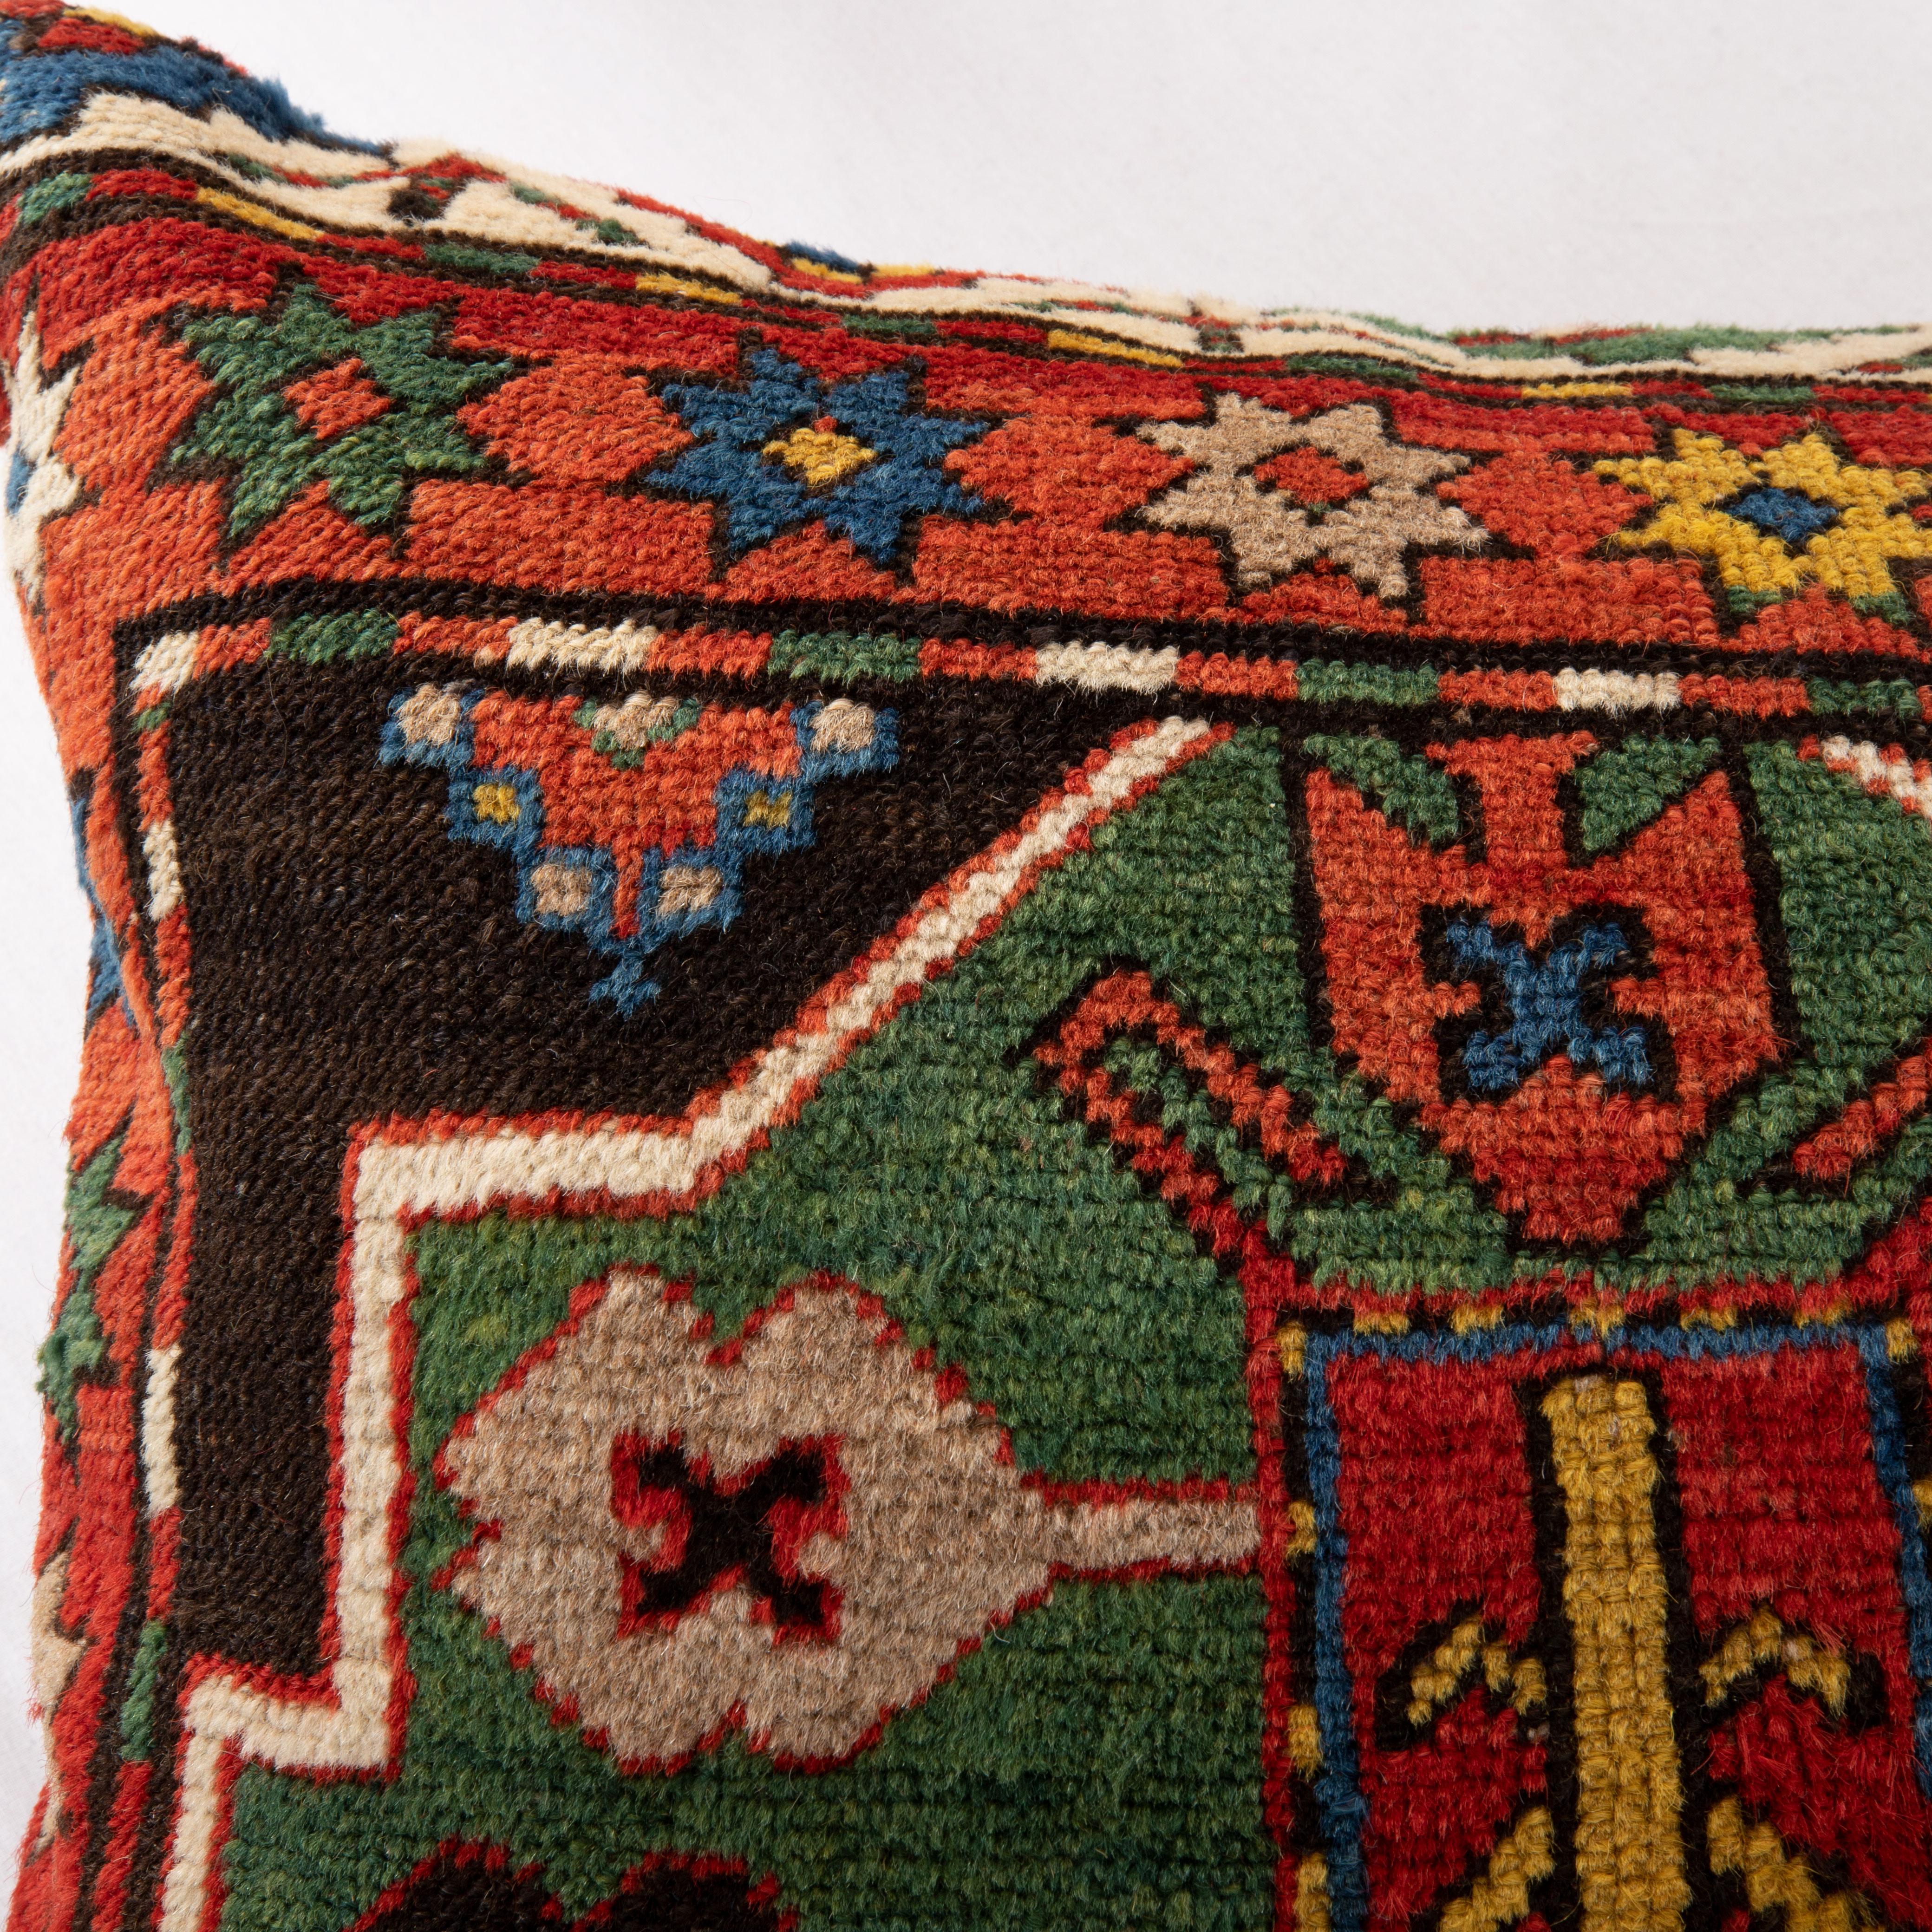 Hand-Woven Antique Karabagh Rug Pillow Cover, Early 20th For Sale